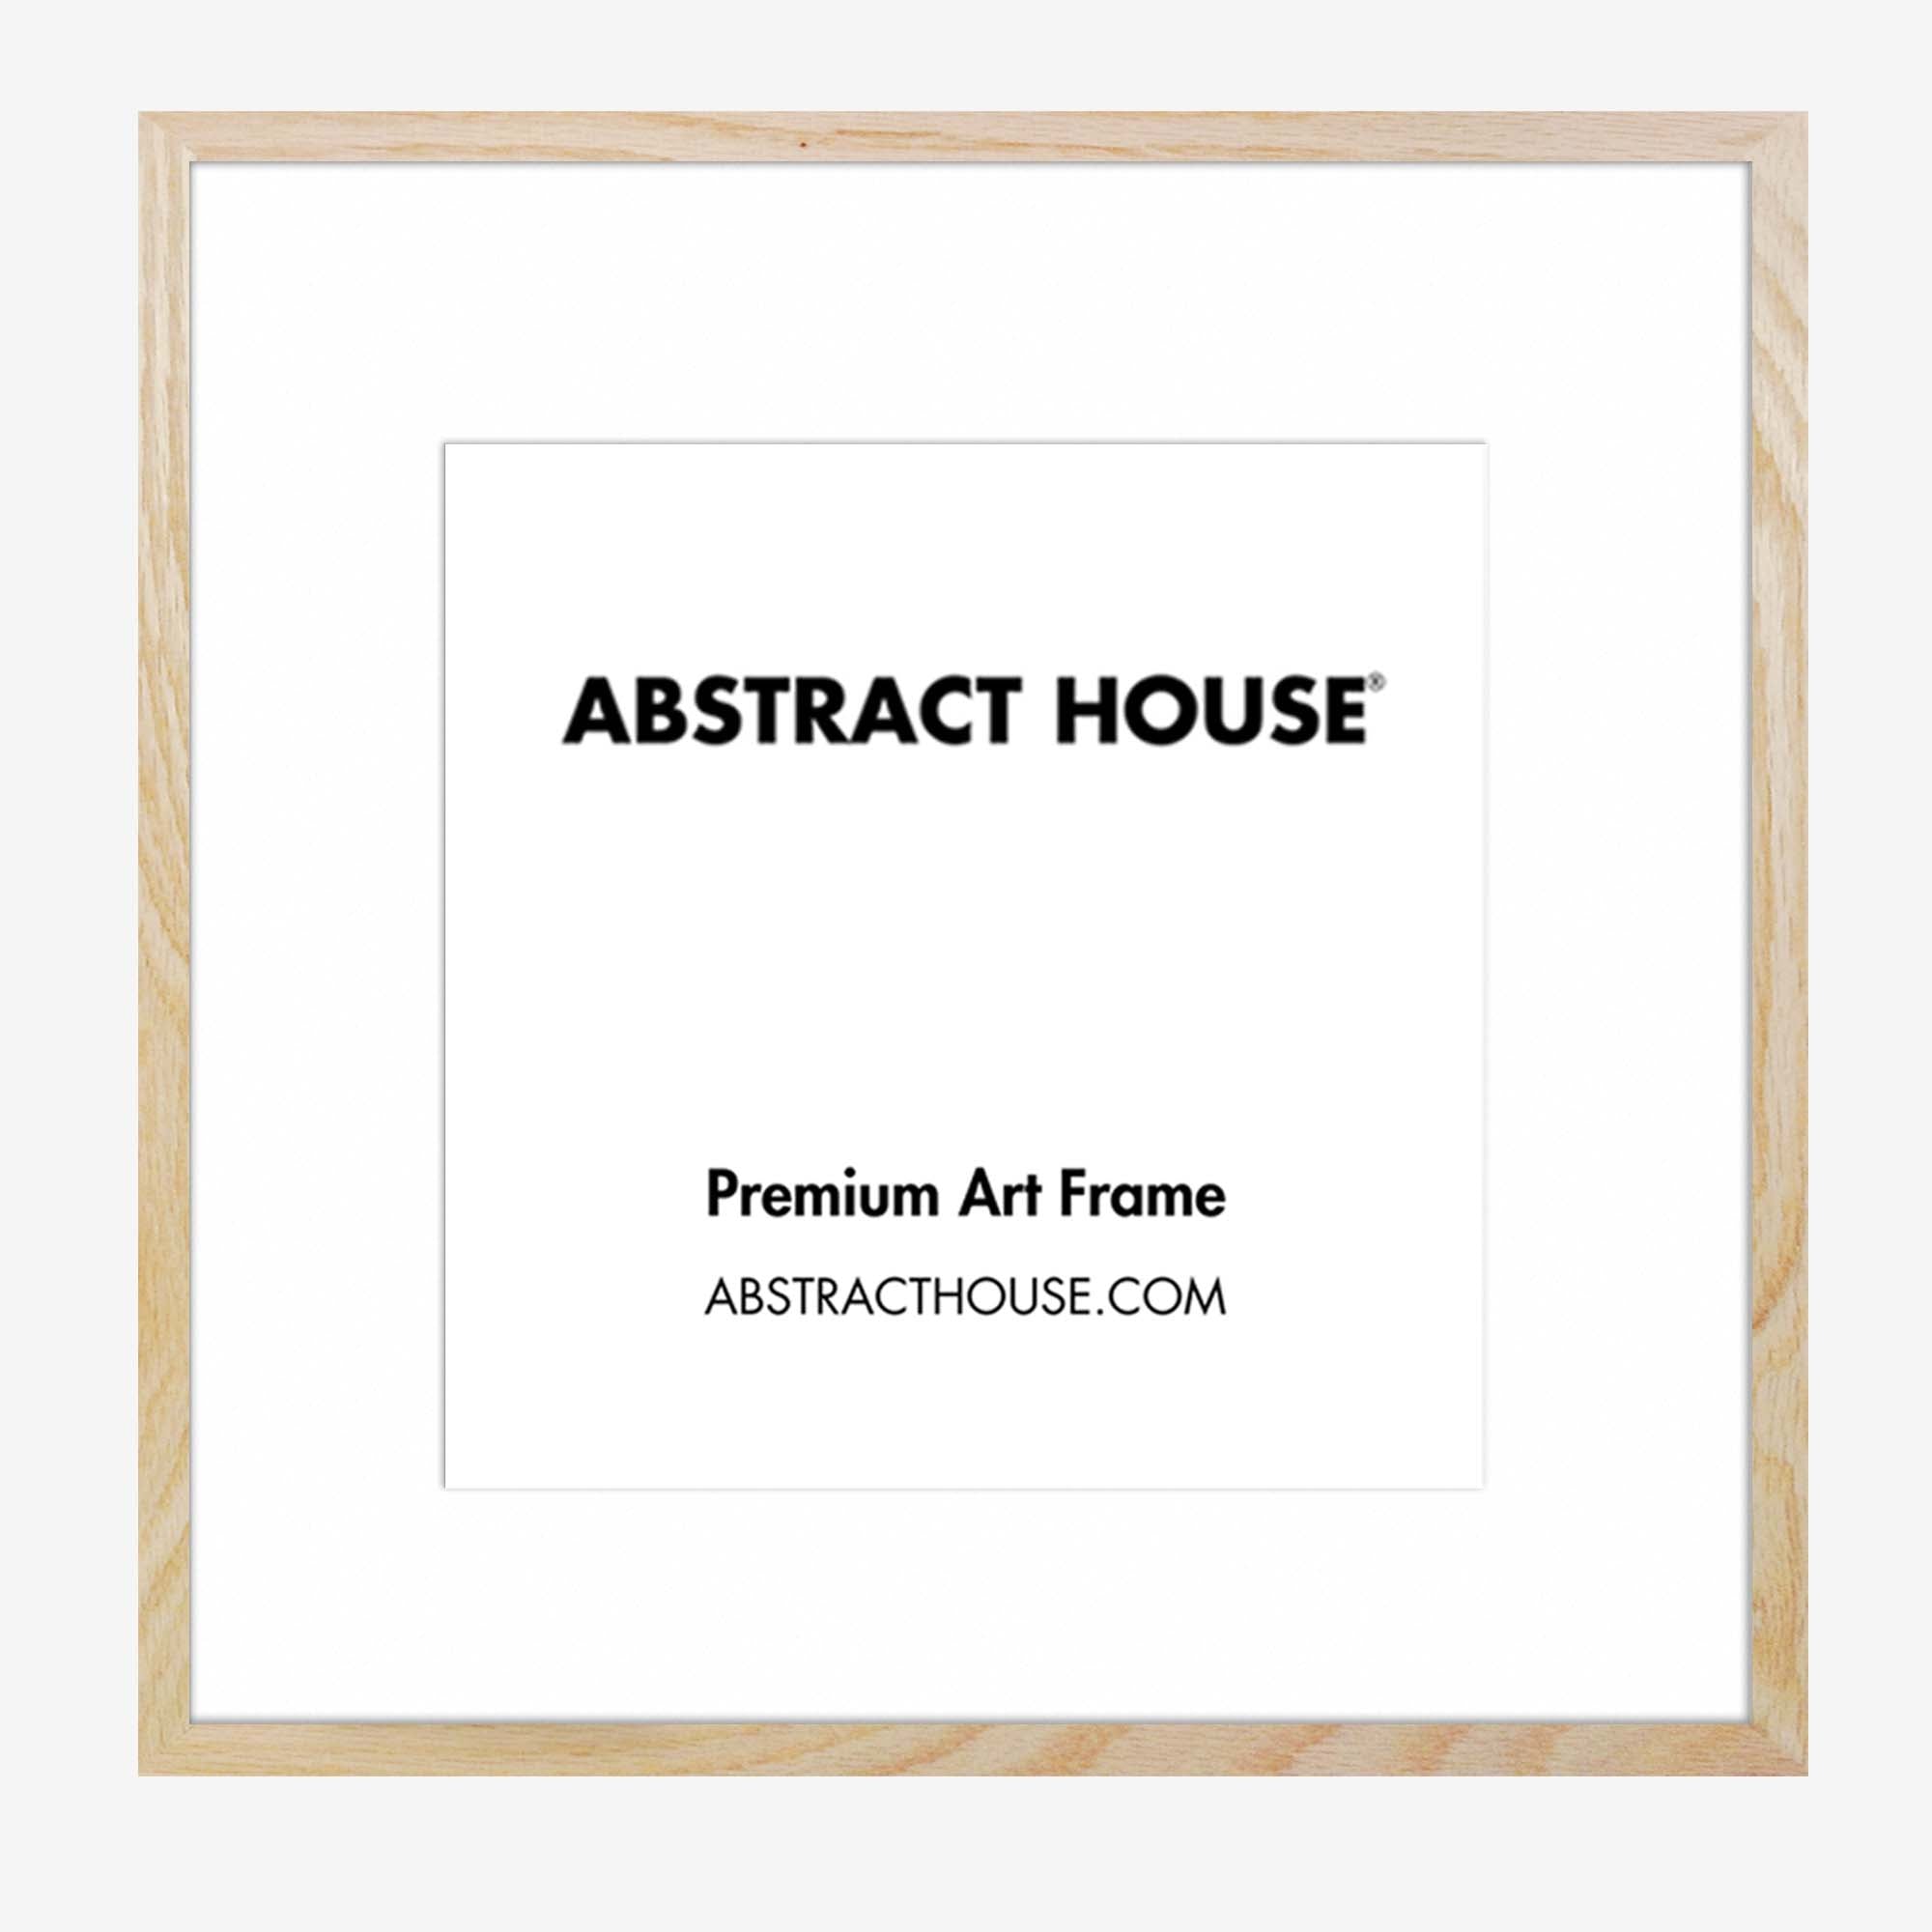 100x100 cm Wooden Frame-Oak-70 x 70 cm / 27.5 x 27.5 Inches-Abstract House